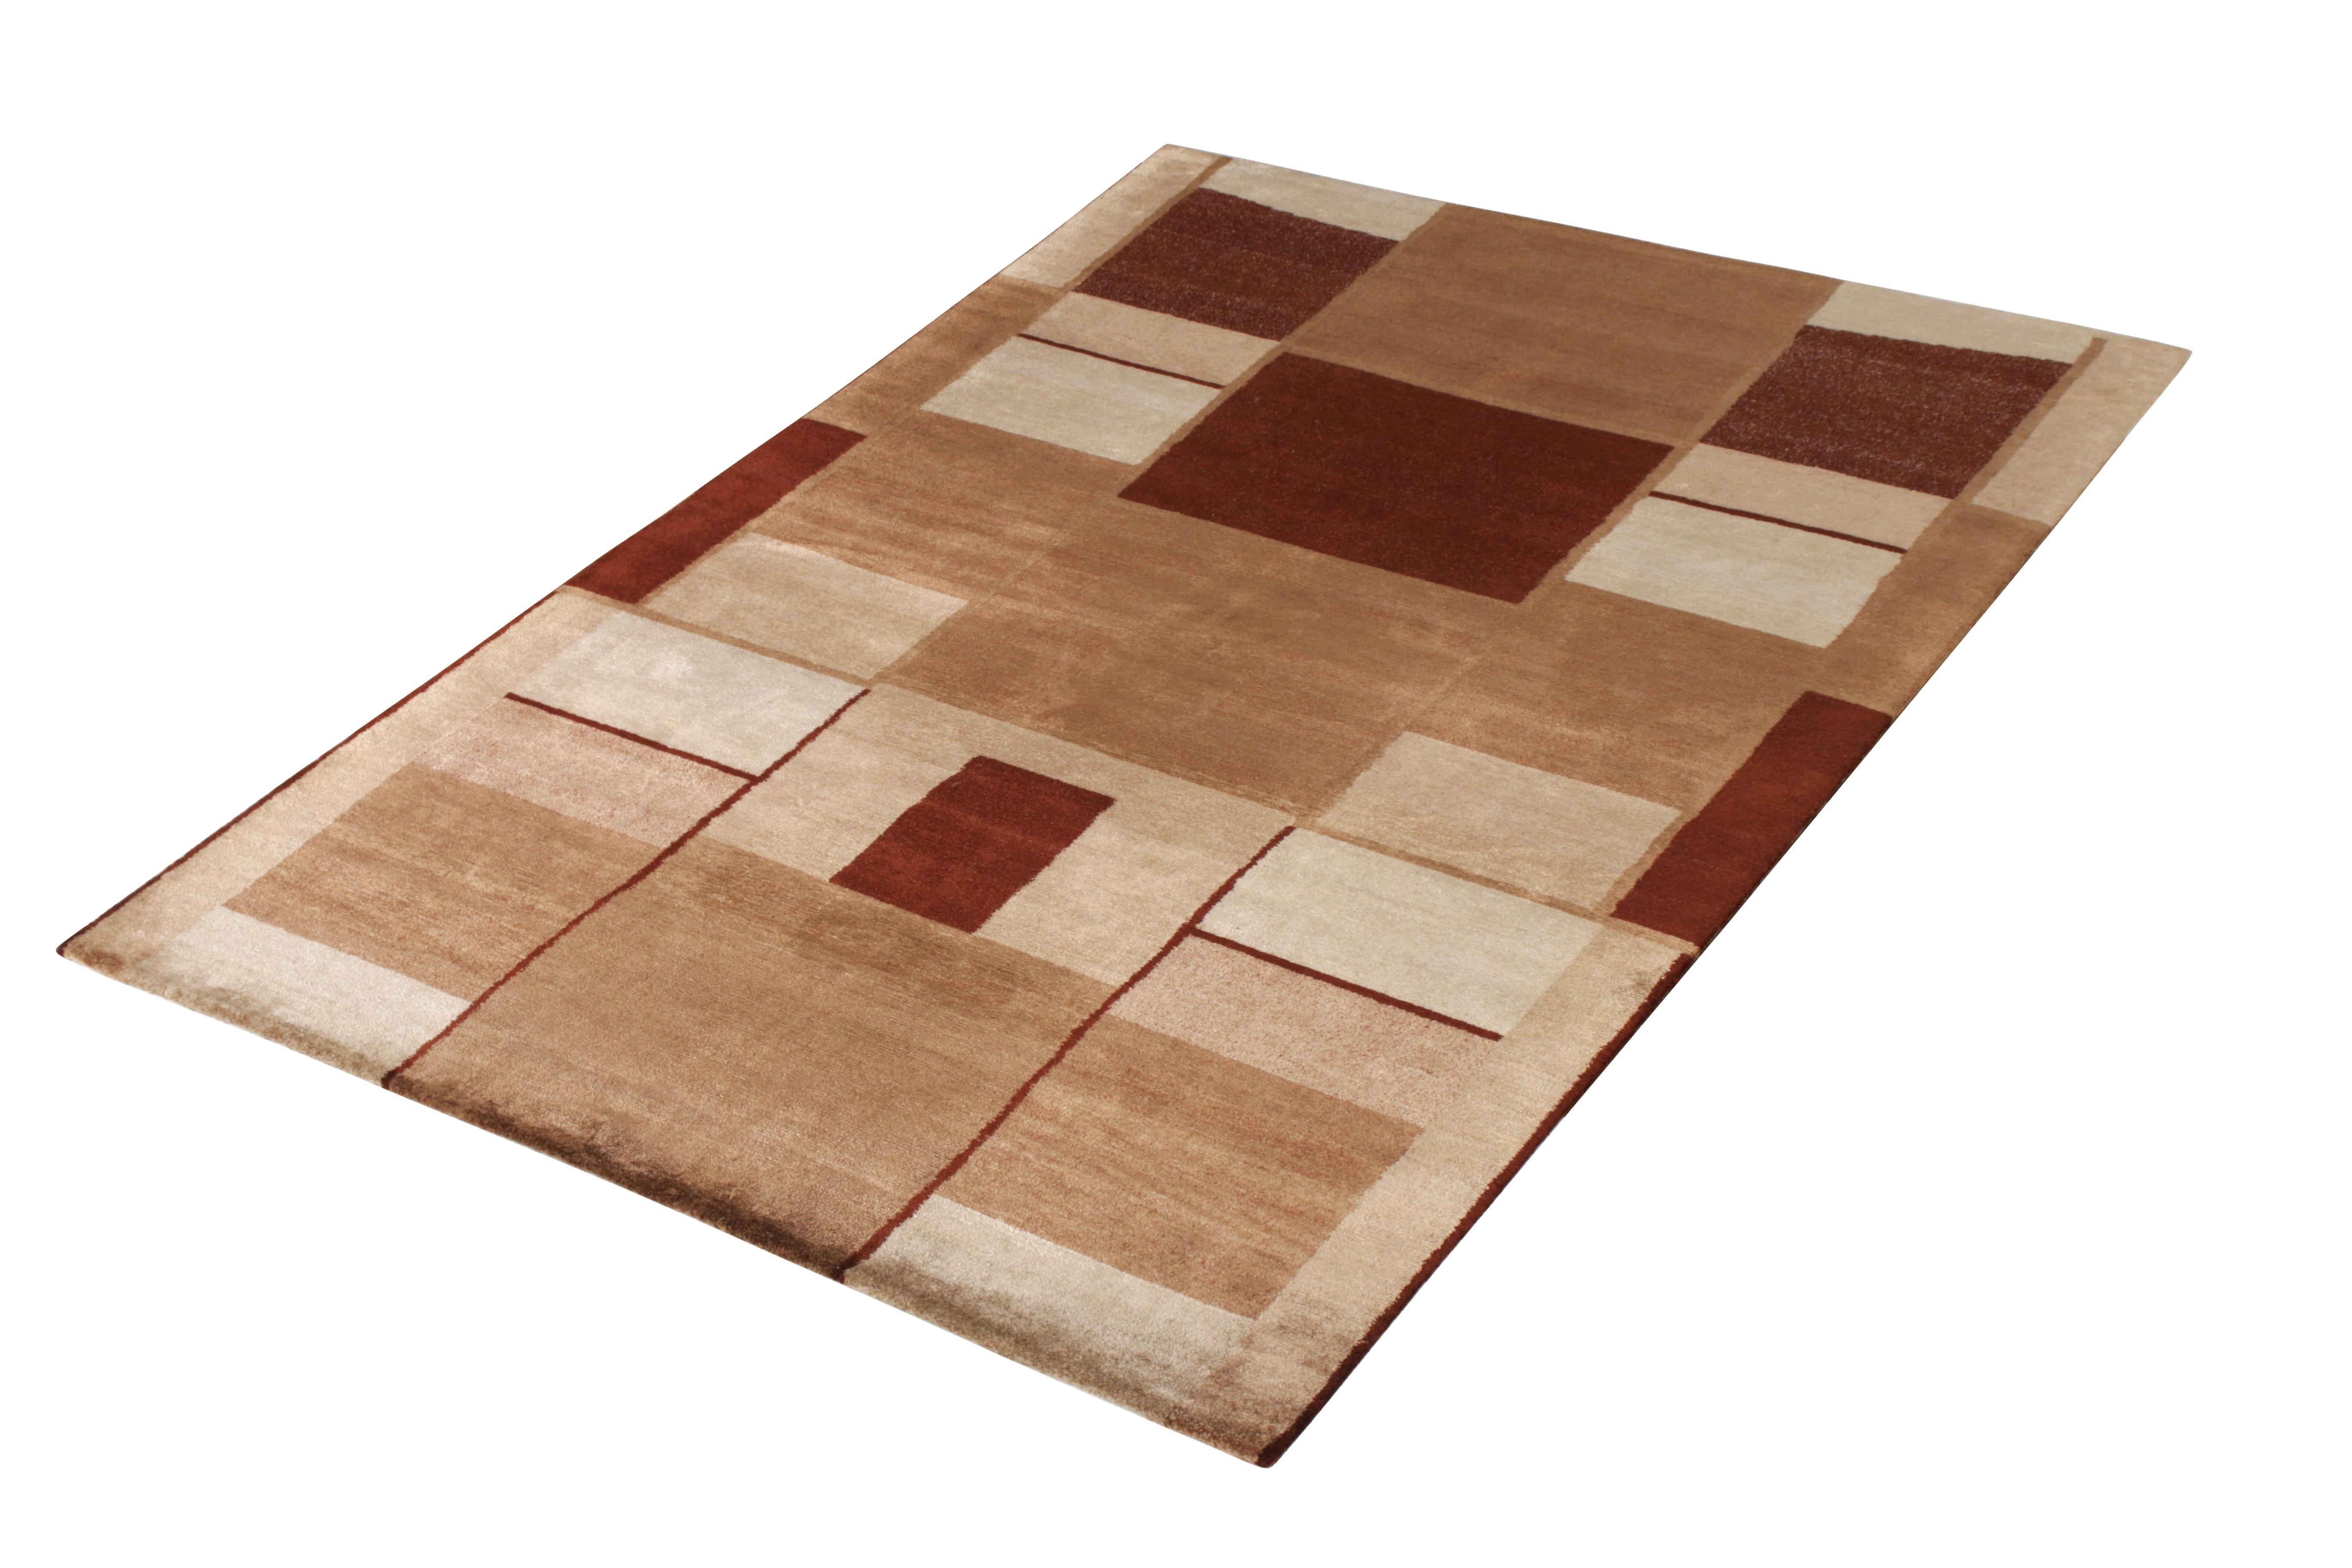 An ode to venerated cubist rug styles in beige and brown, from Rug & Kilim’s New & Modern Collection. This 6x9 is hand knotted in wool and all natural silk, embracing art deco sensibilities of symmetry and distinction. 

On the design: The silk’s